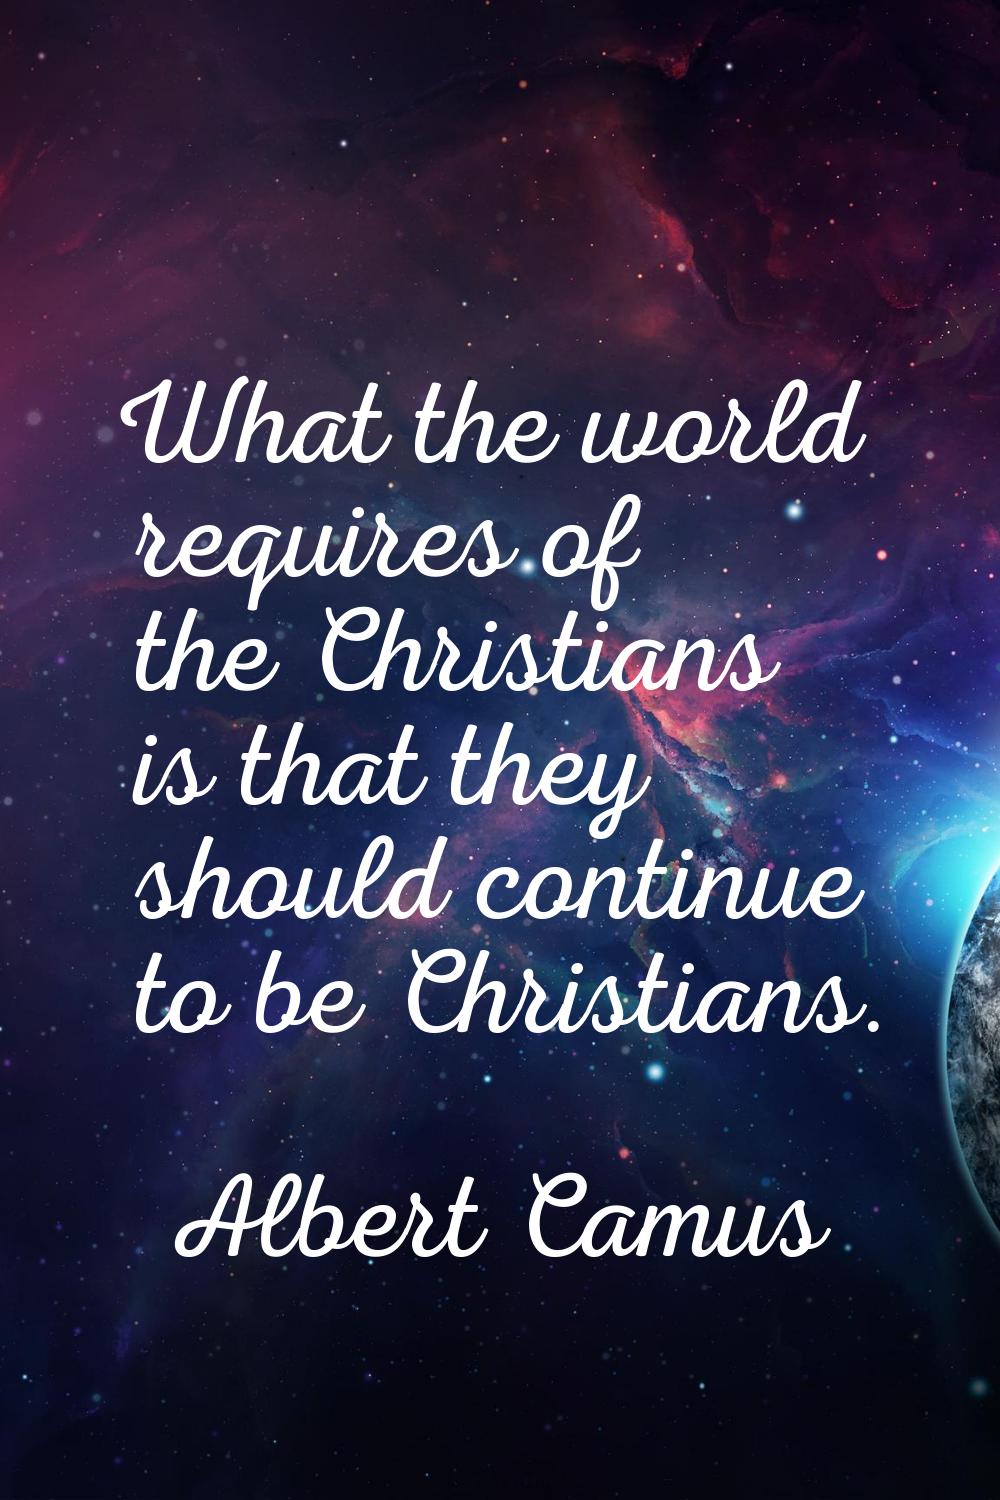 What the world requires of the Christians is that they should continue to be Christians.